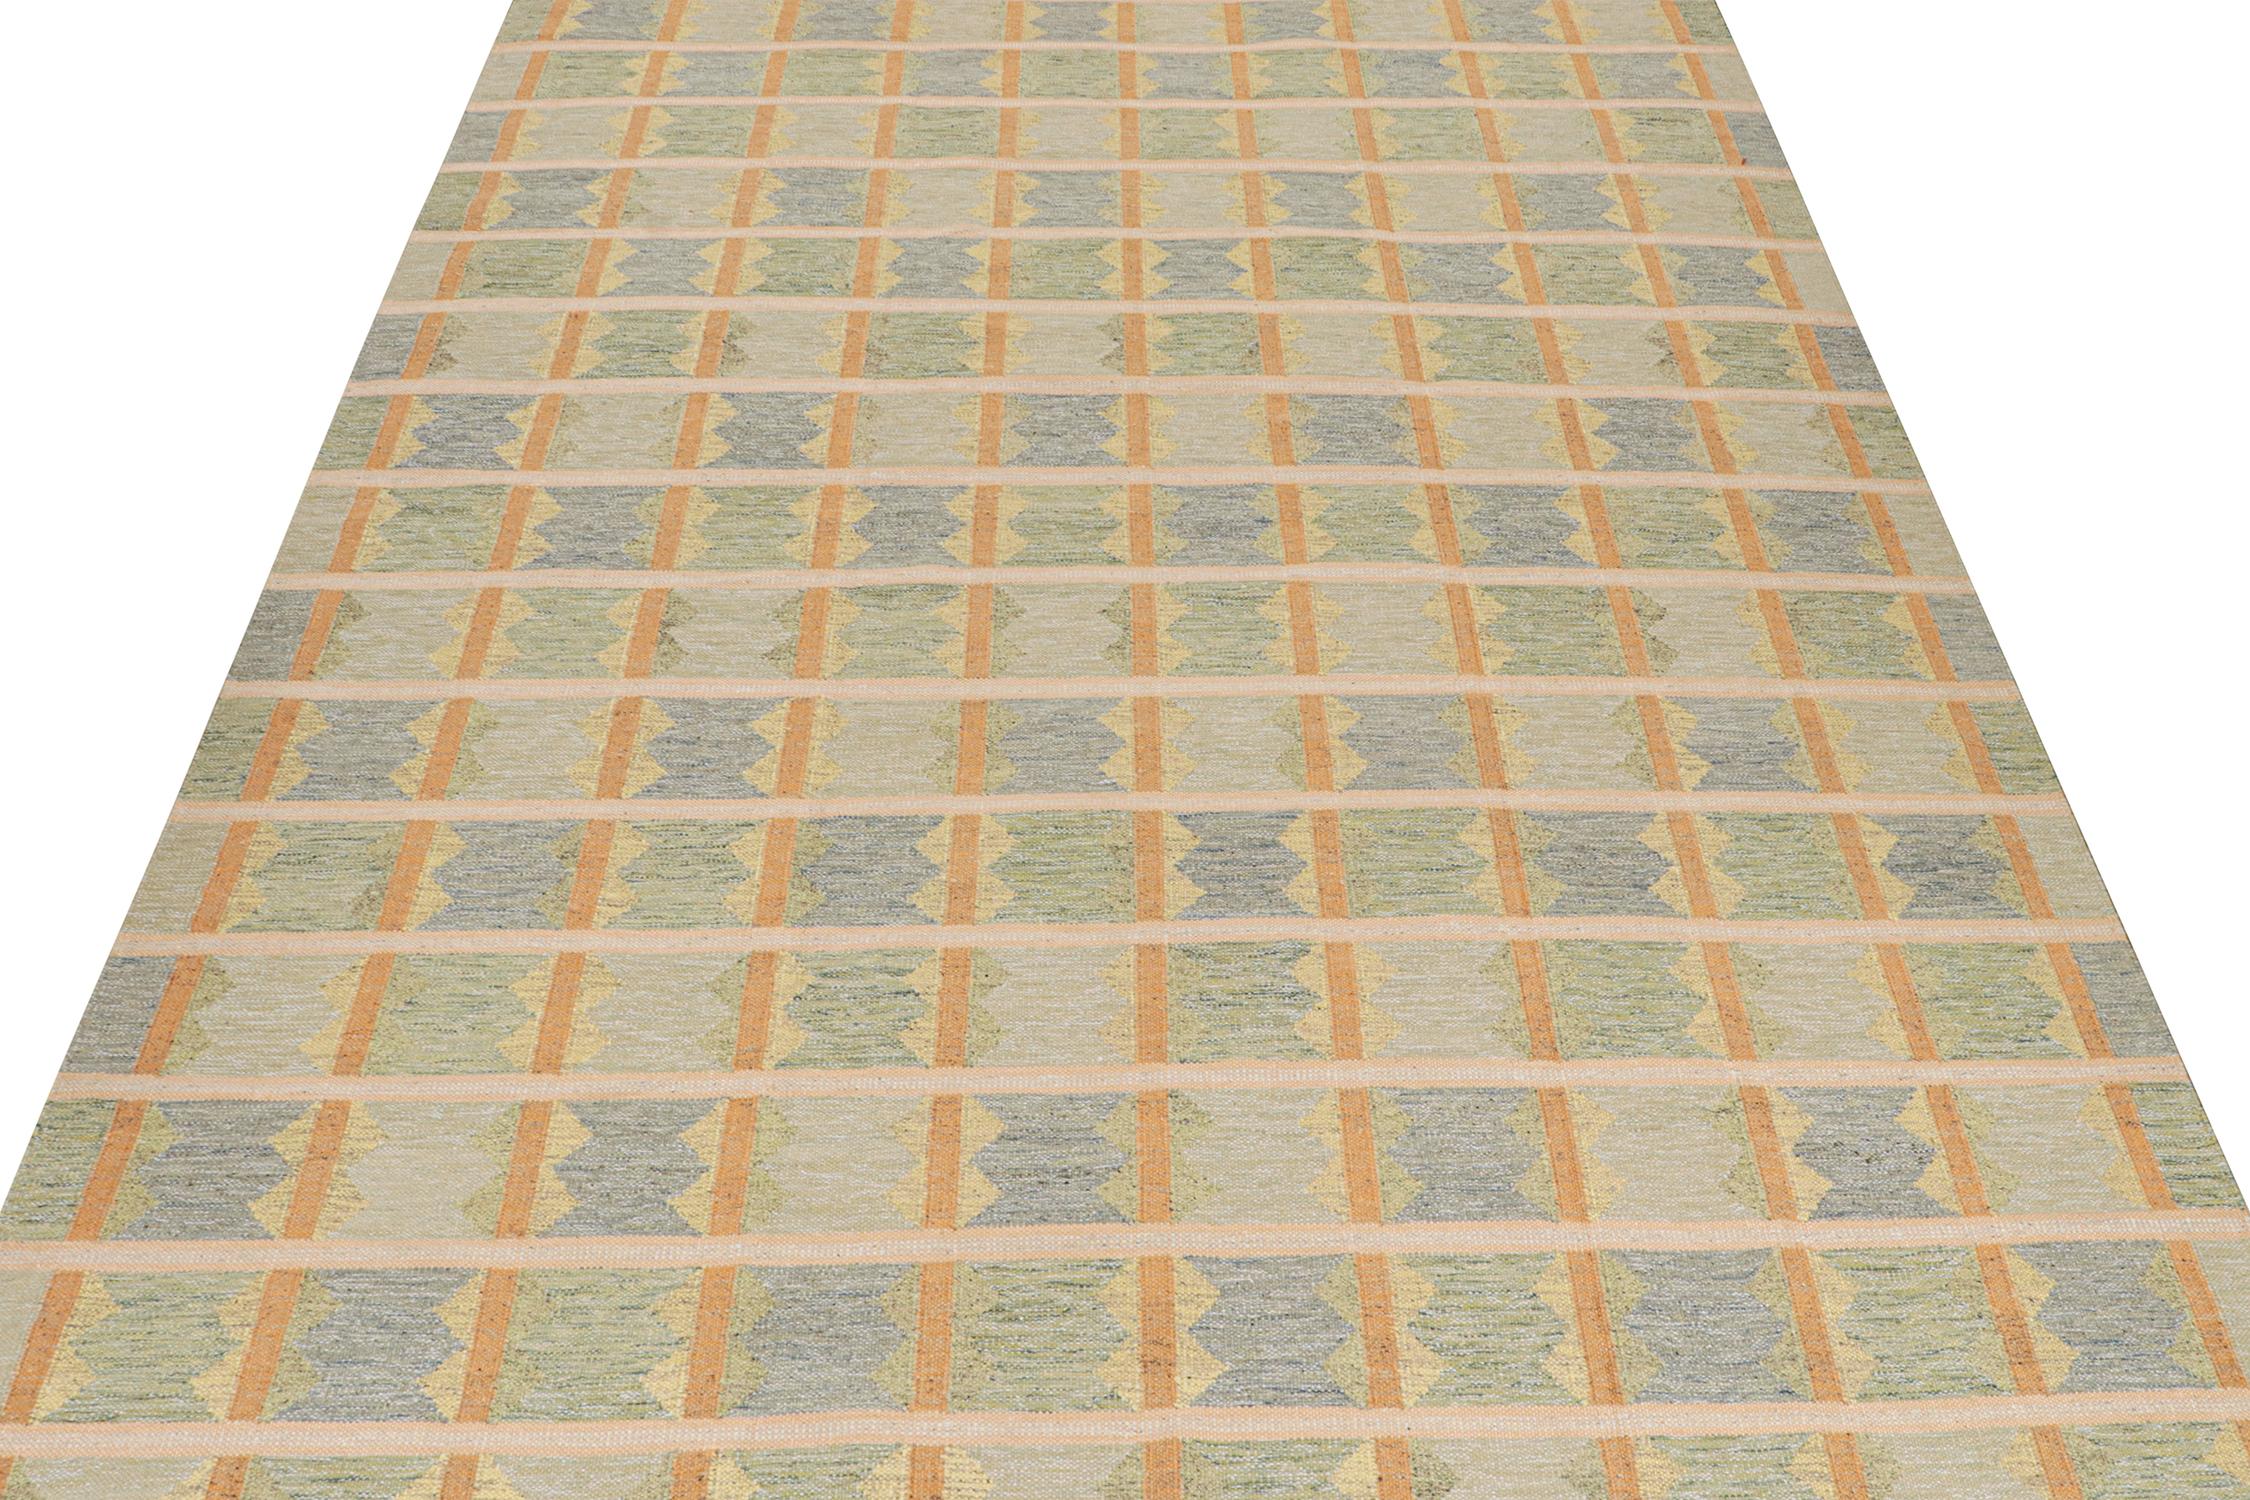 This 12x15 Kilim is a bold new addition to the Scandinavian Collection by Rug & Kilim. Handwoven in wool and natural yarns, its design reflects a contemporary take on mid-century Rollakans and Swedish Deco style.

On the Design:

This new flat